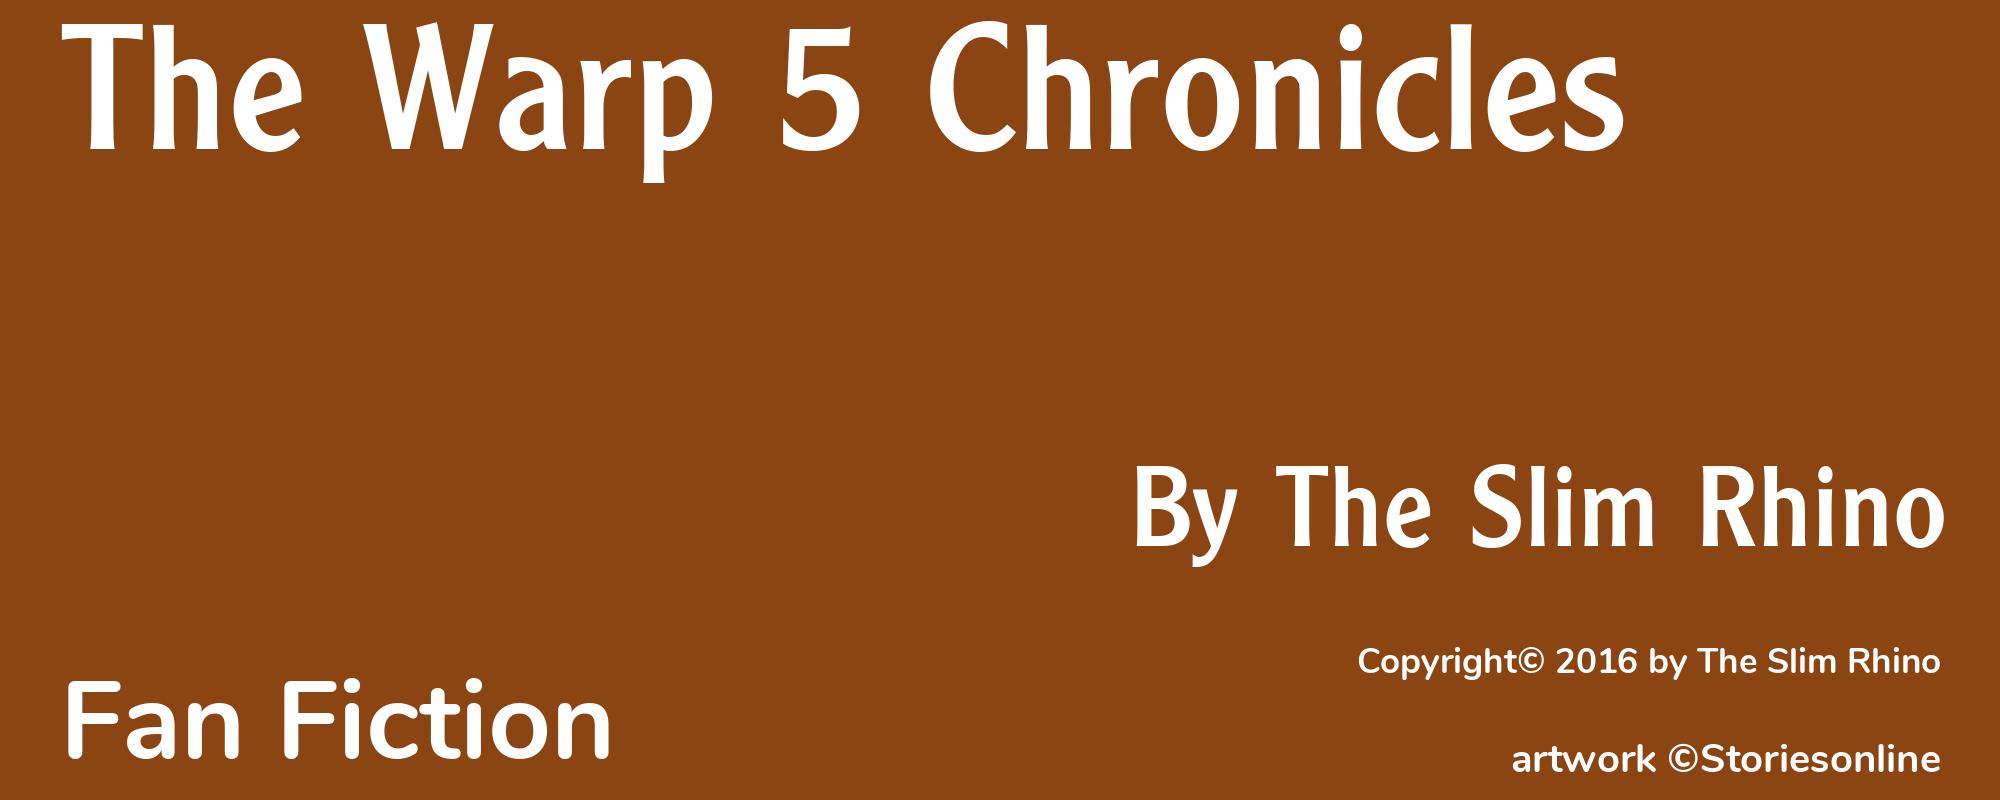 The Warp 5 Chronicles - Cover